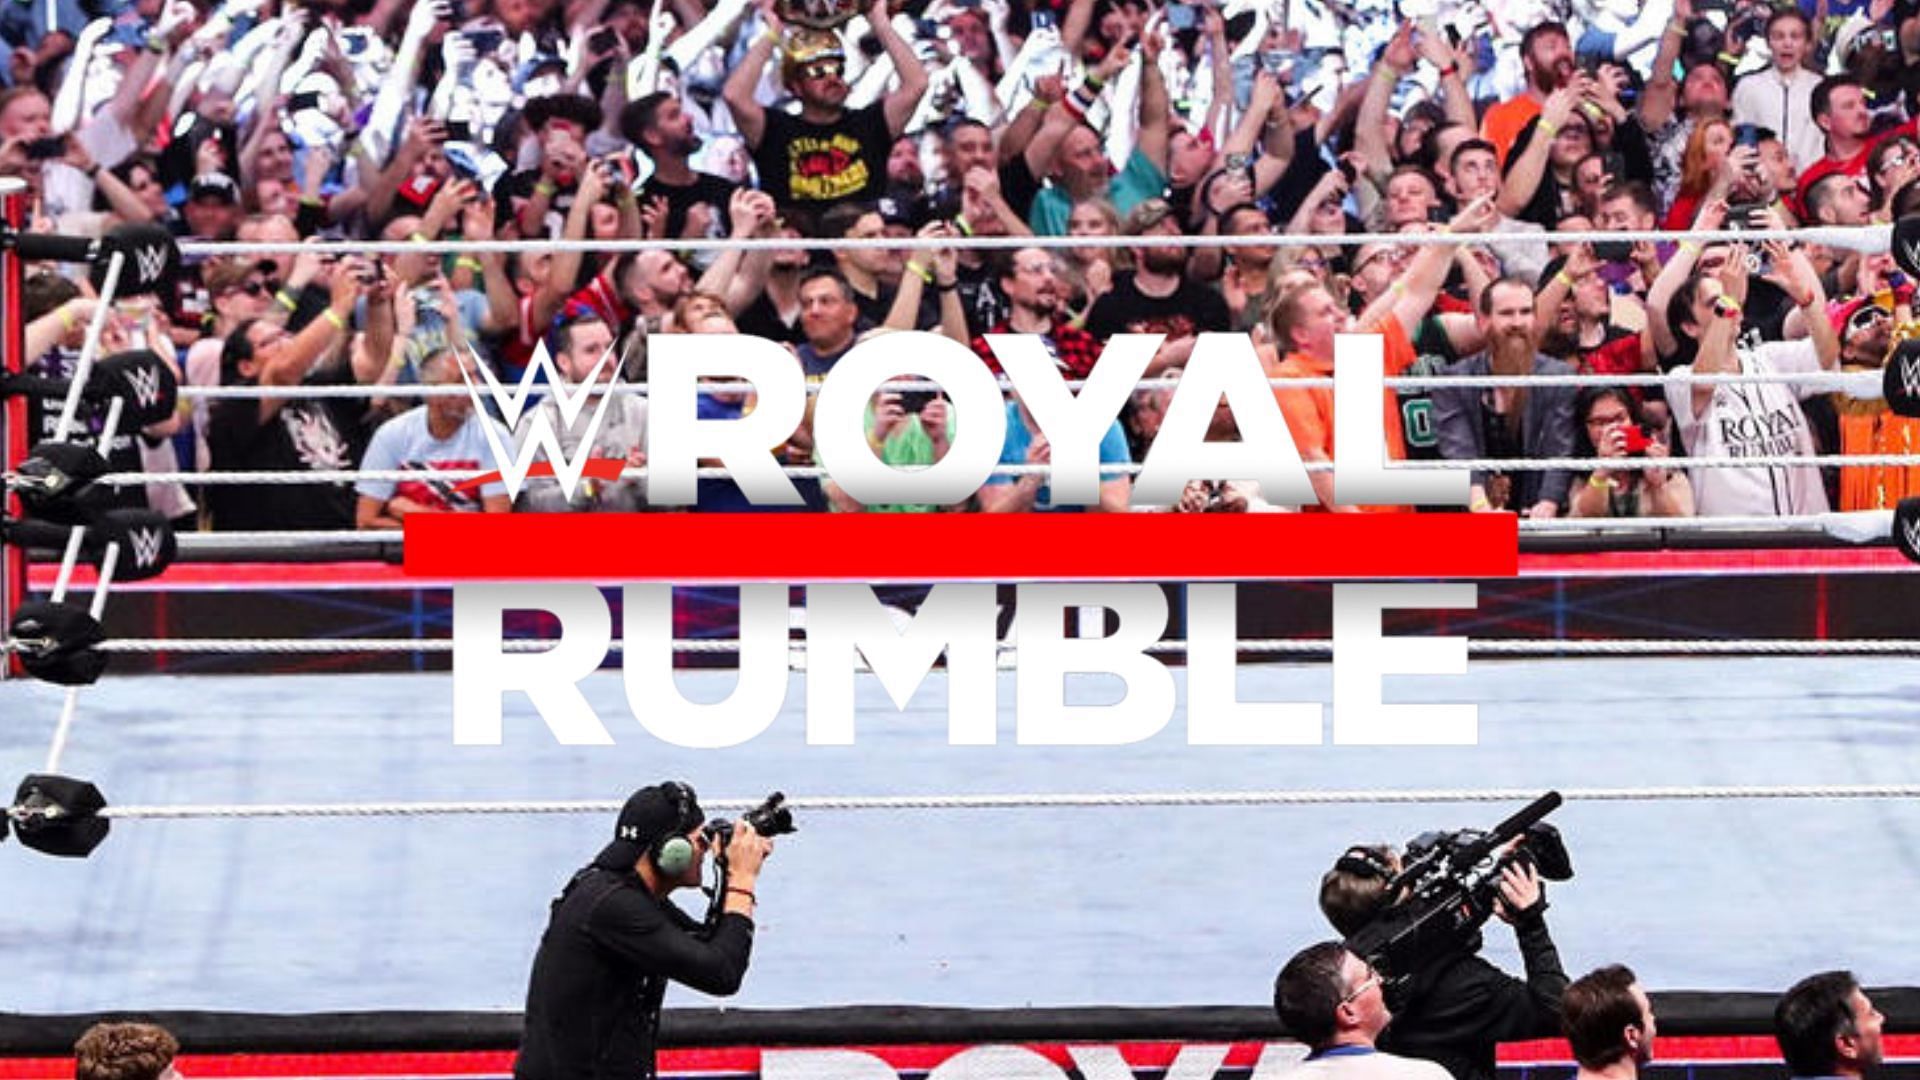 Royal Rumble was a star-studded event.